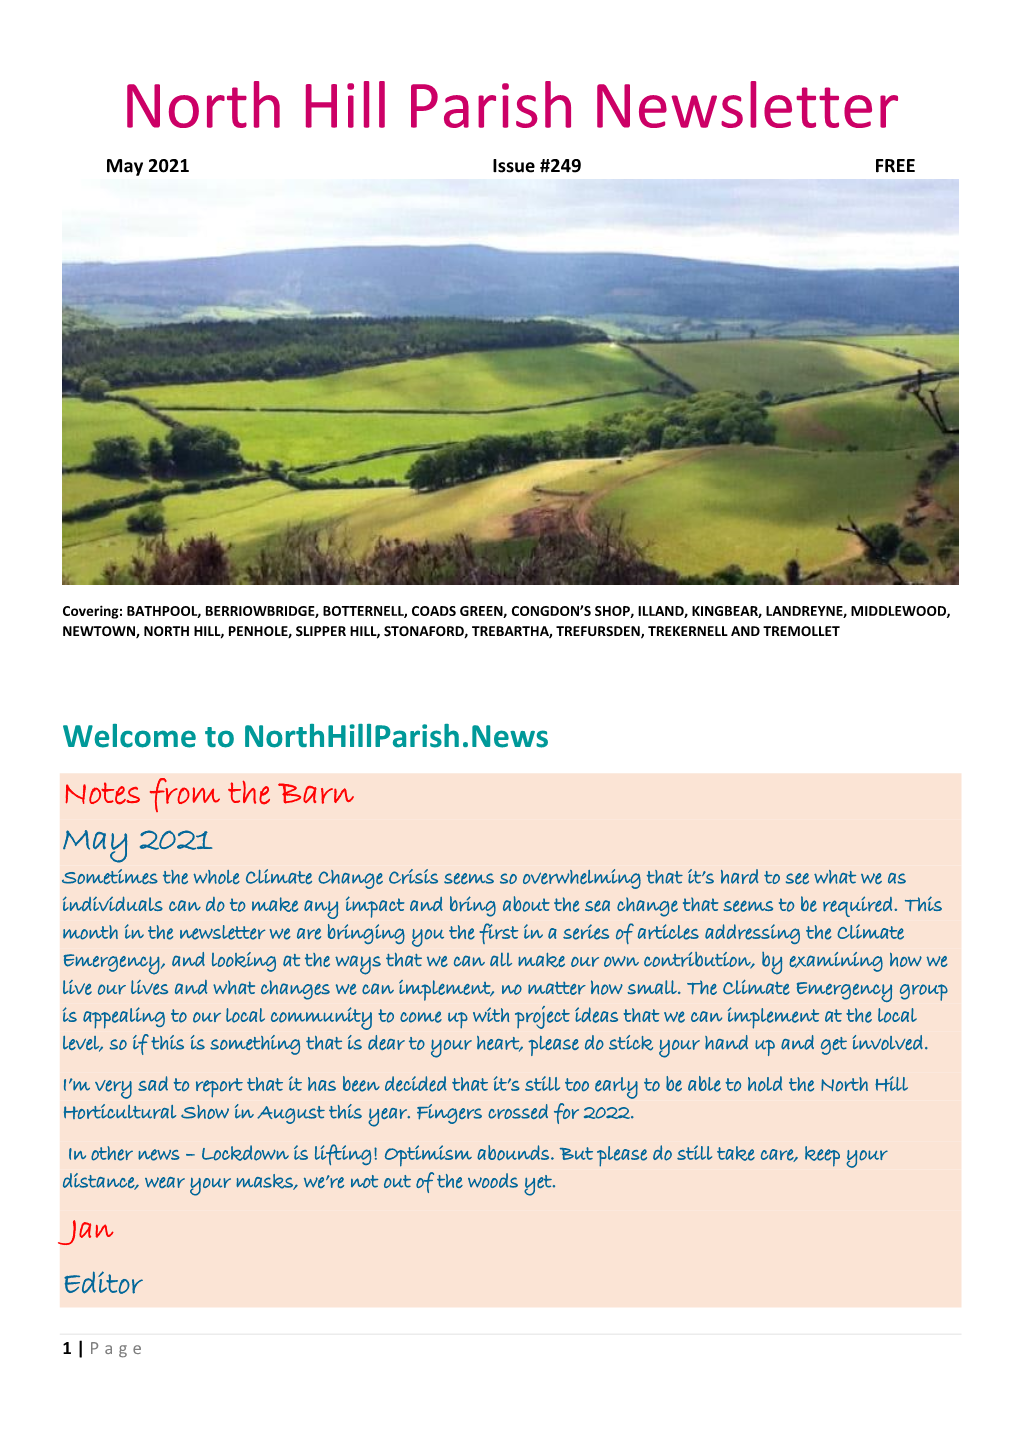 North Hill Parish Newsletter May 2021 Issue #249 FREE